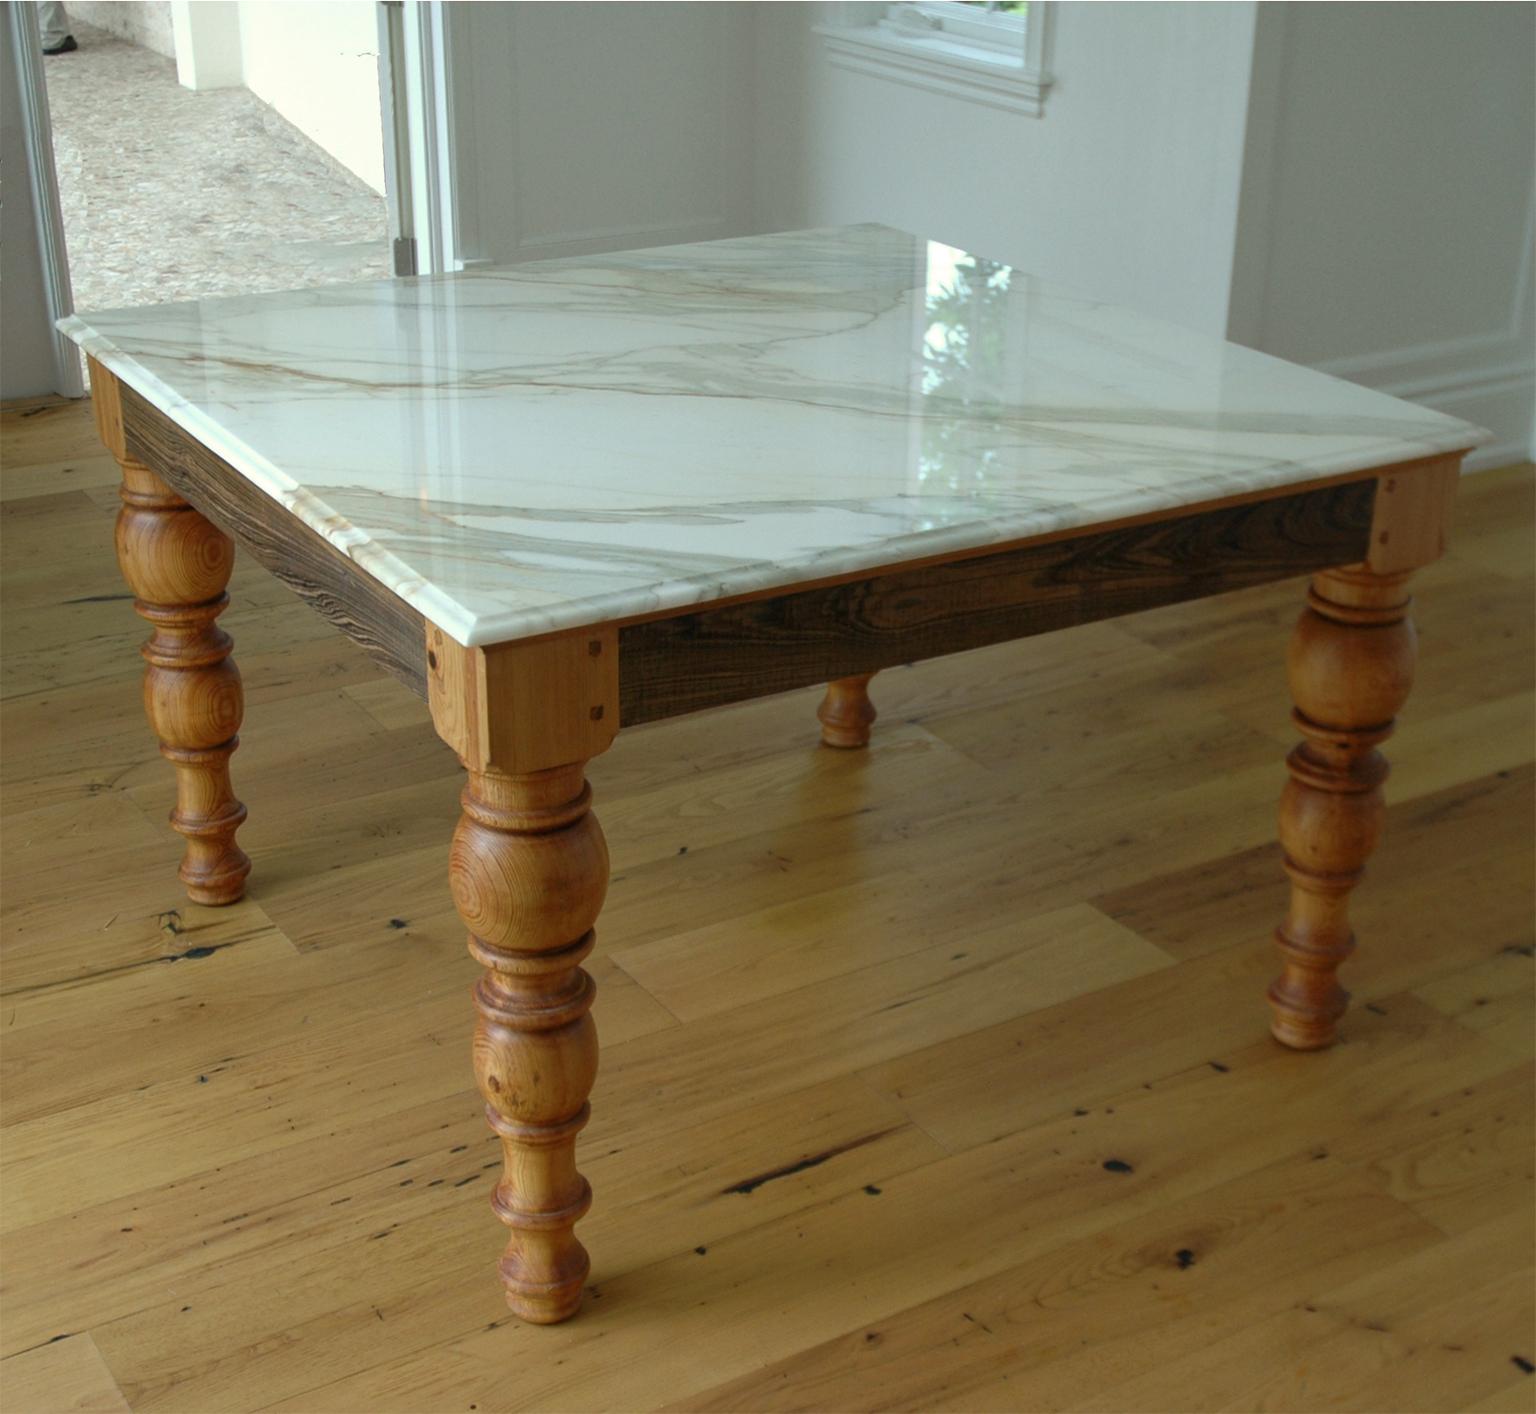 A beautiful & very-well crafted pine dining table, custom-made in our workshop with massive, Scandinavian-style legs turned from reclaimed pine beams that support a beautiful Calacatta gold or white Carrara marble top with an O-gee edge. (Shown with